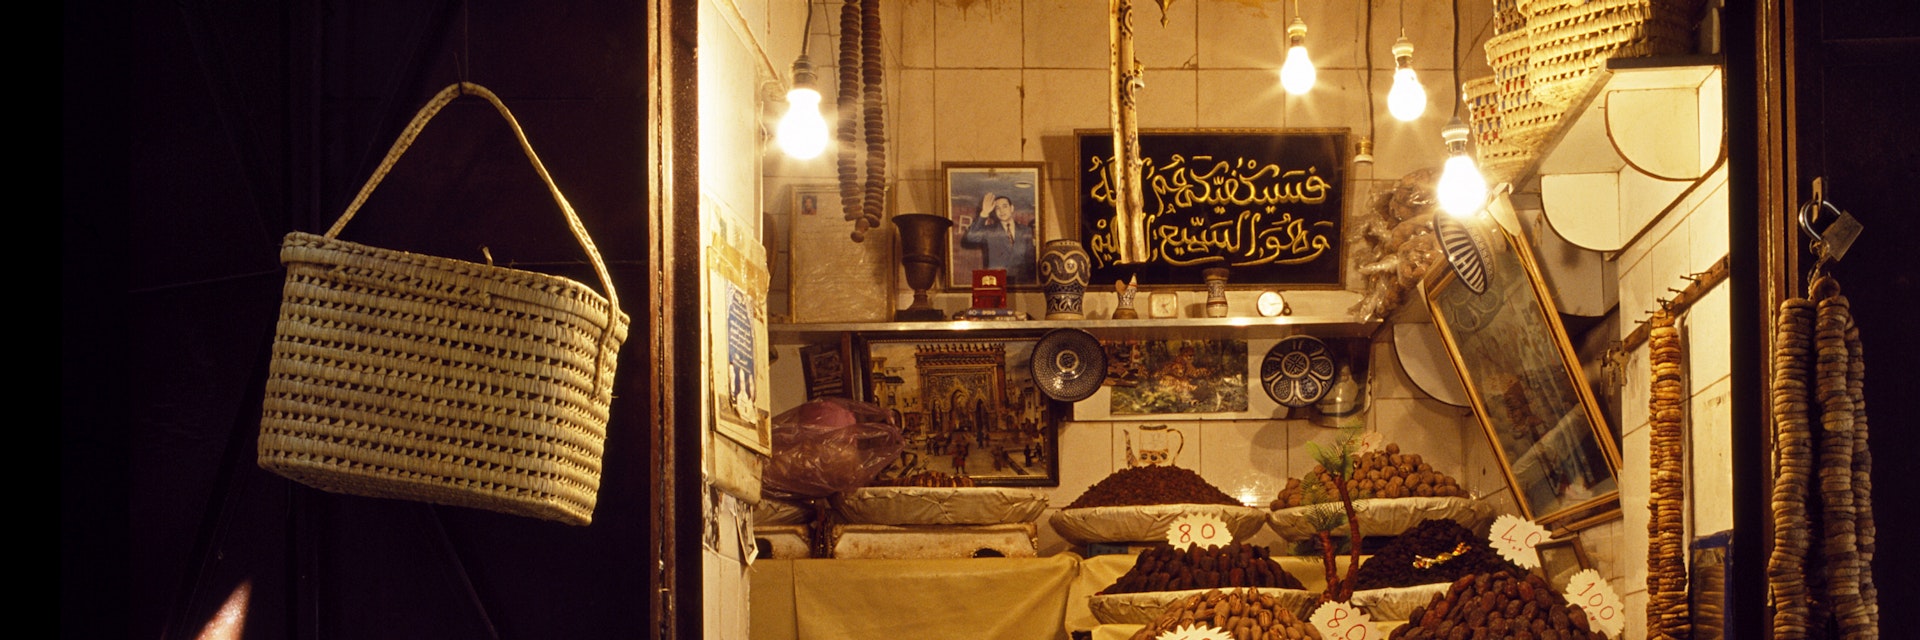 The date, fig and walnut stall next to the entrance of the Medersa El-Attarine deep in the ancient Medina of Fes, Morocco.